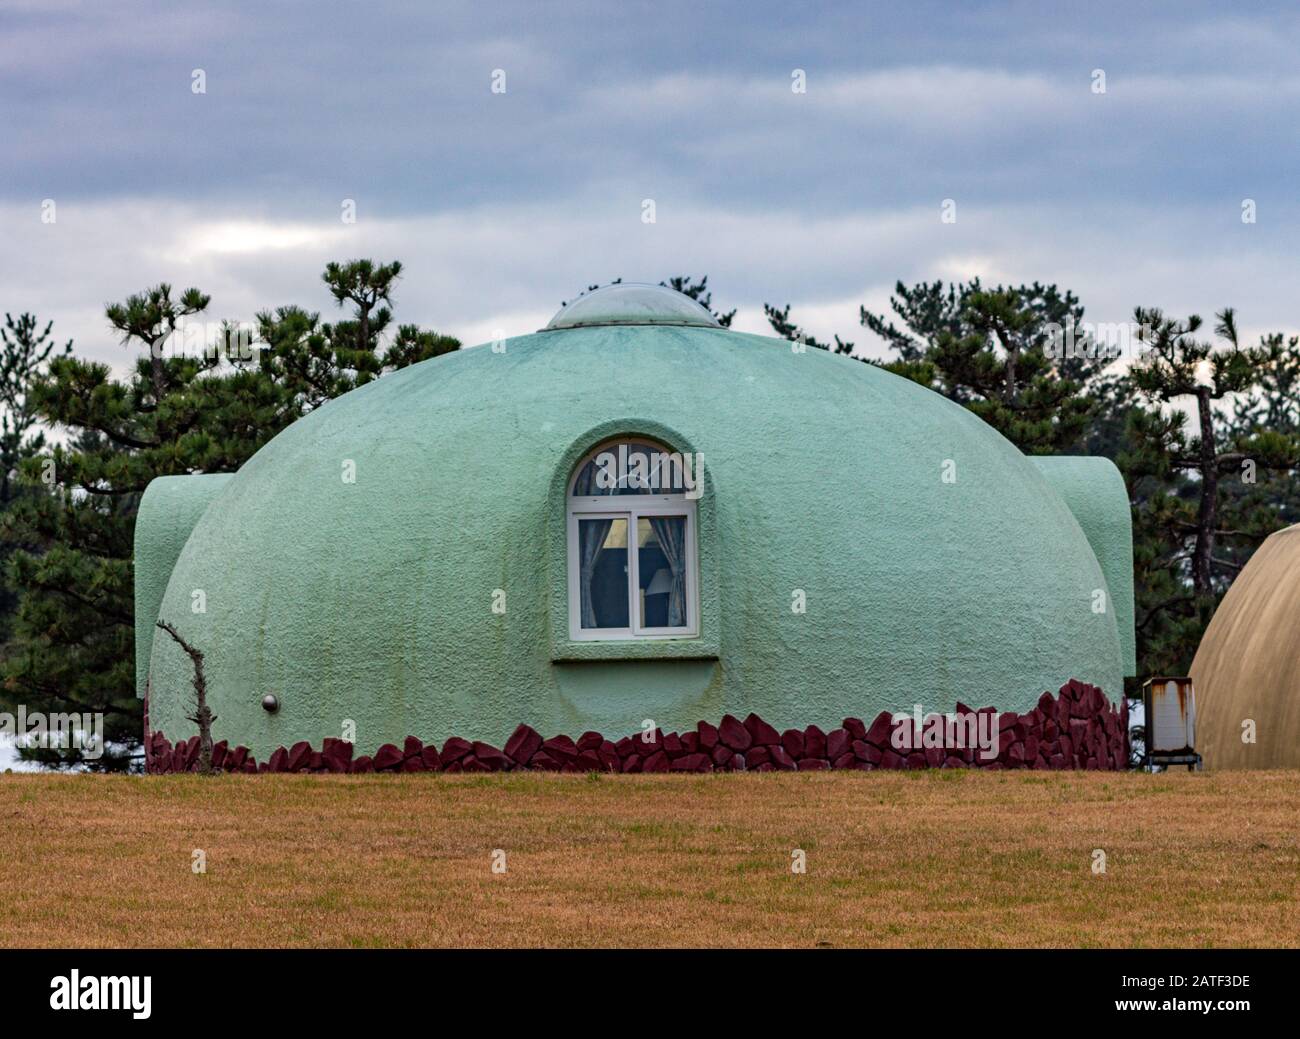 Dome house, Kaga, Ishikawa Prefecture, Japan. Dome houses are assembled from prefabricated components. Stock Photo